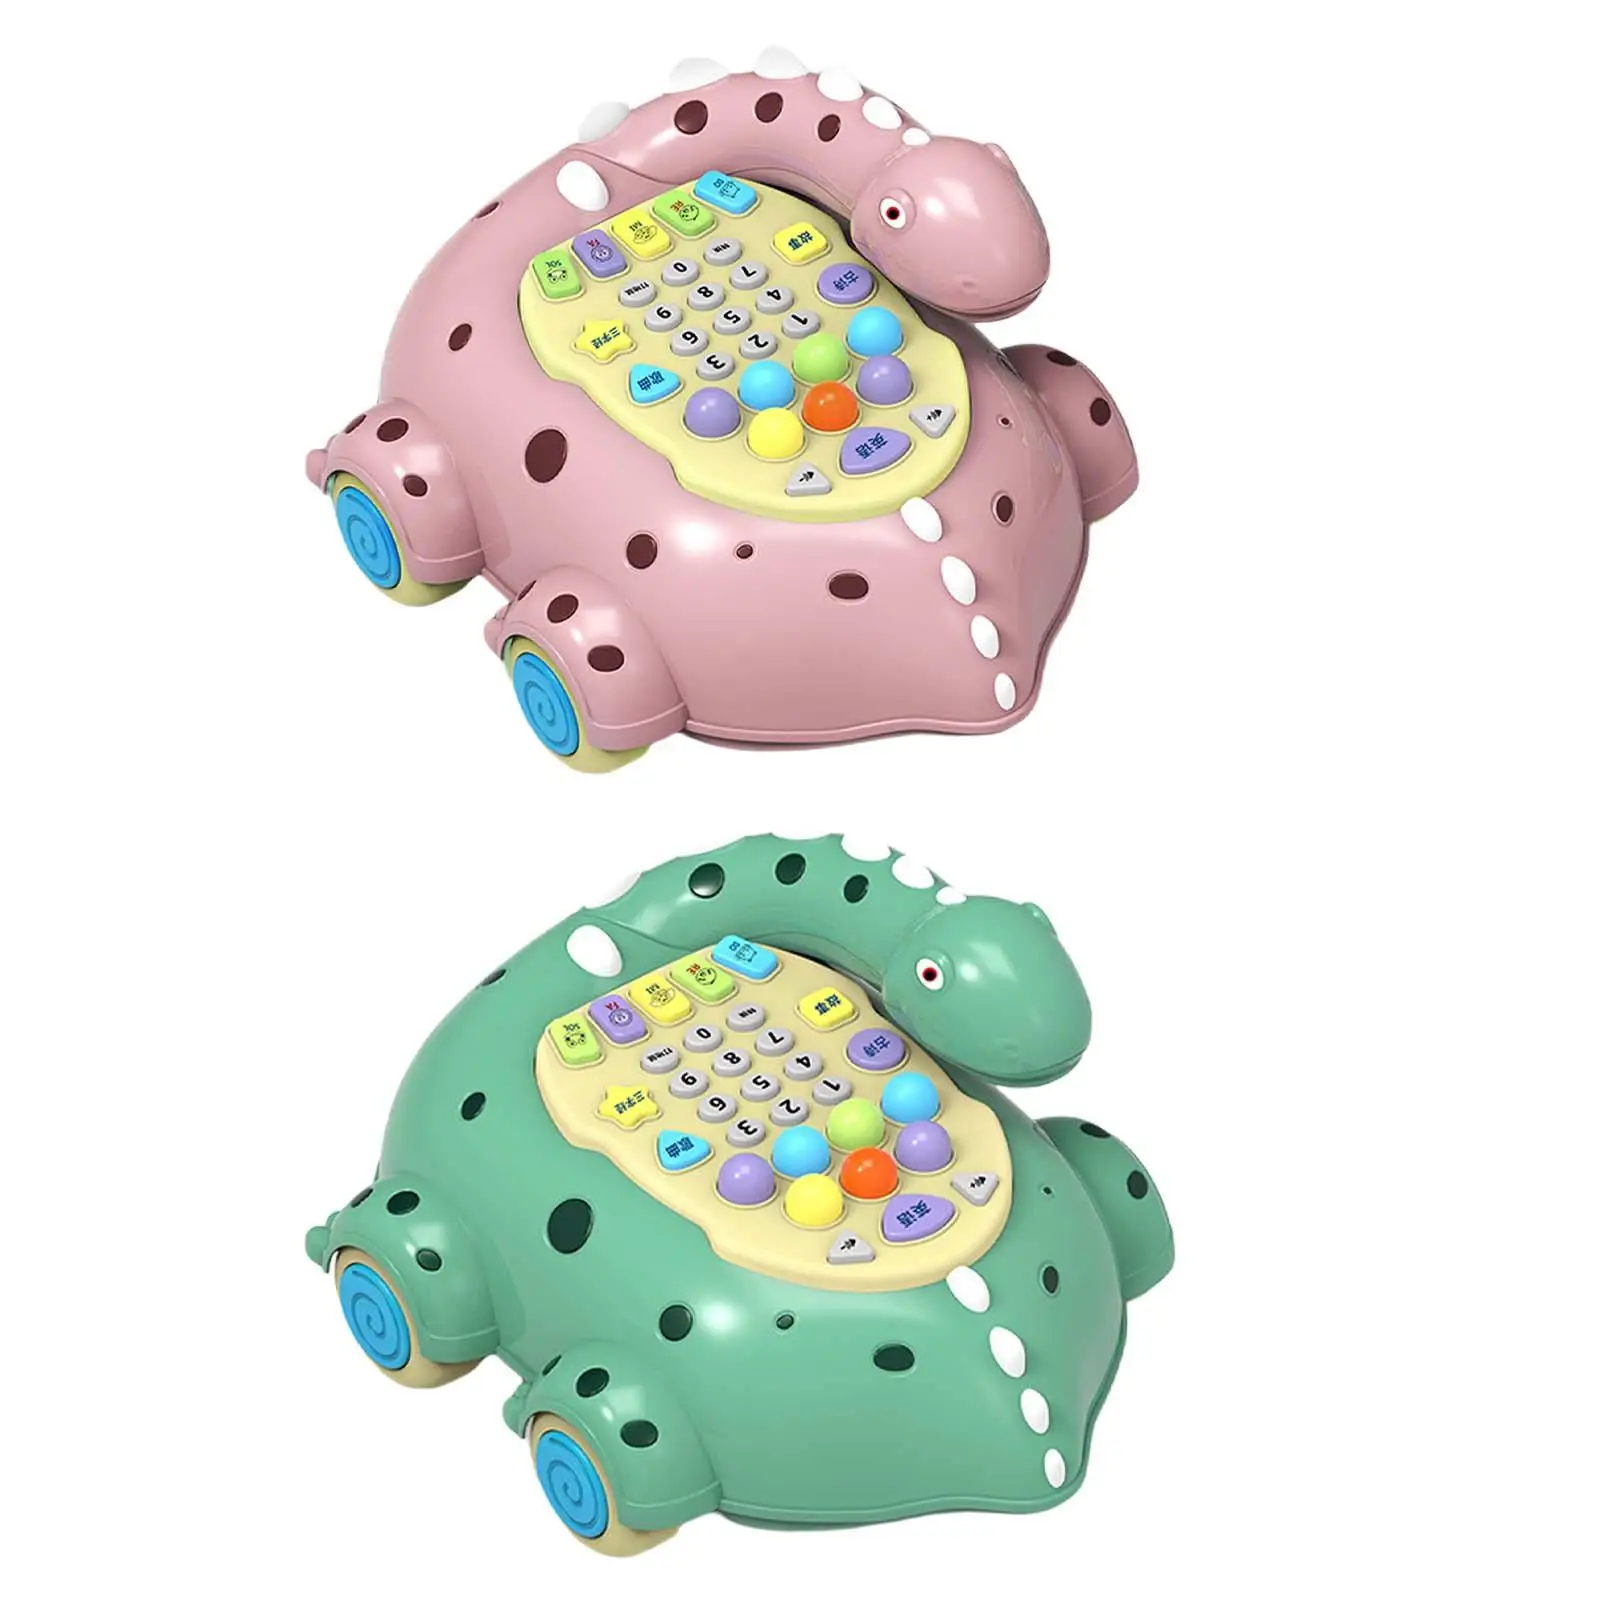 Music Light Phone Toy Movable kids Musical Telephone Toys Car for Education Development Preschool Learning Activity